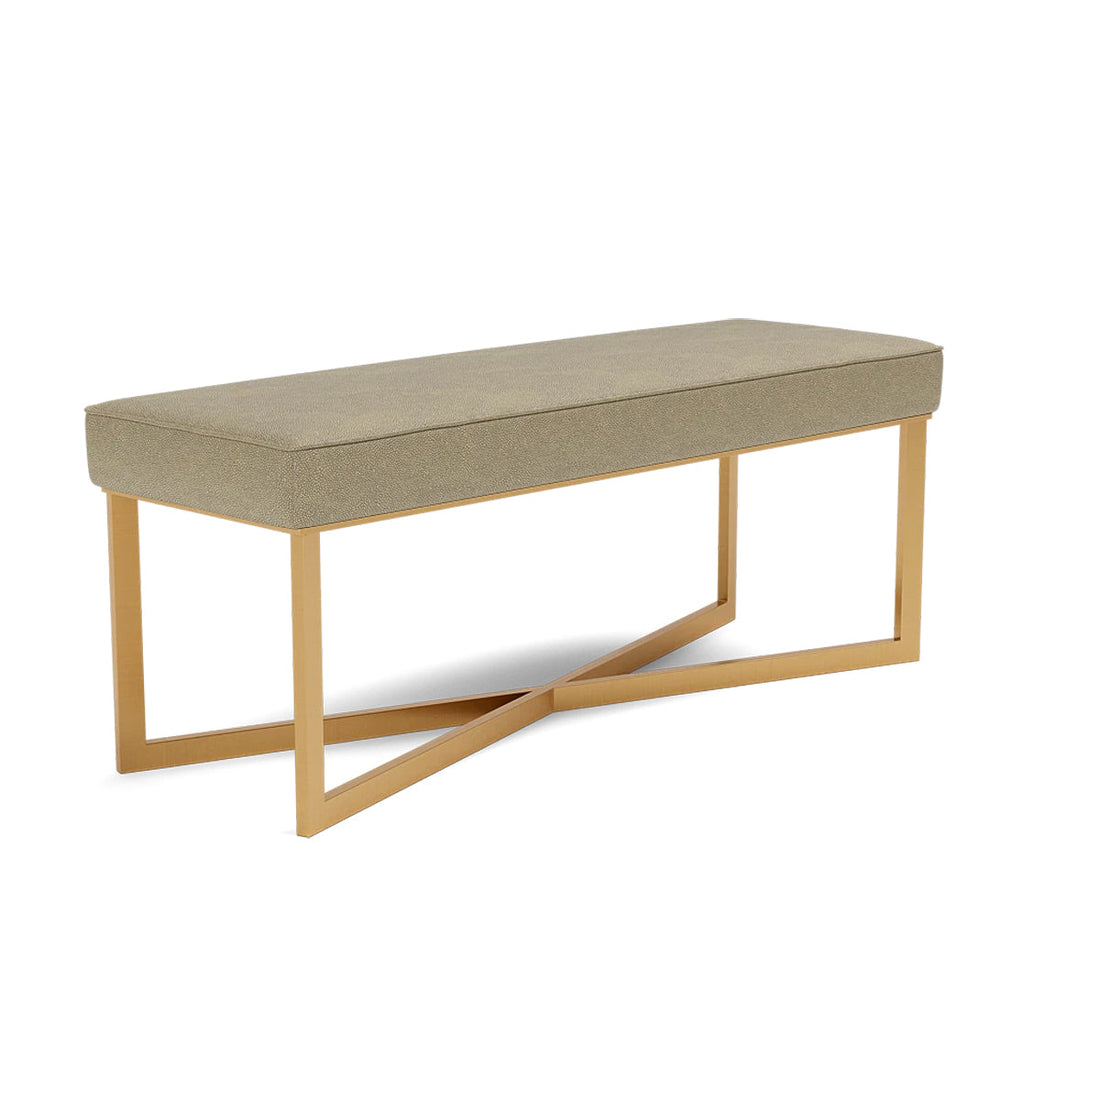 Made Goods Roger Double Bench in Bassac Shagreen Leather